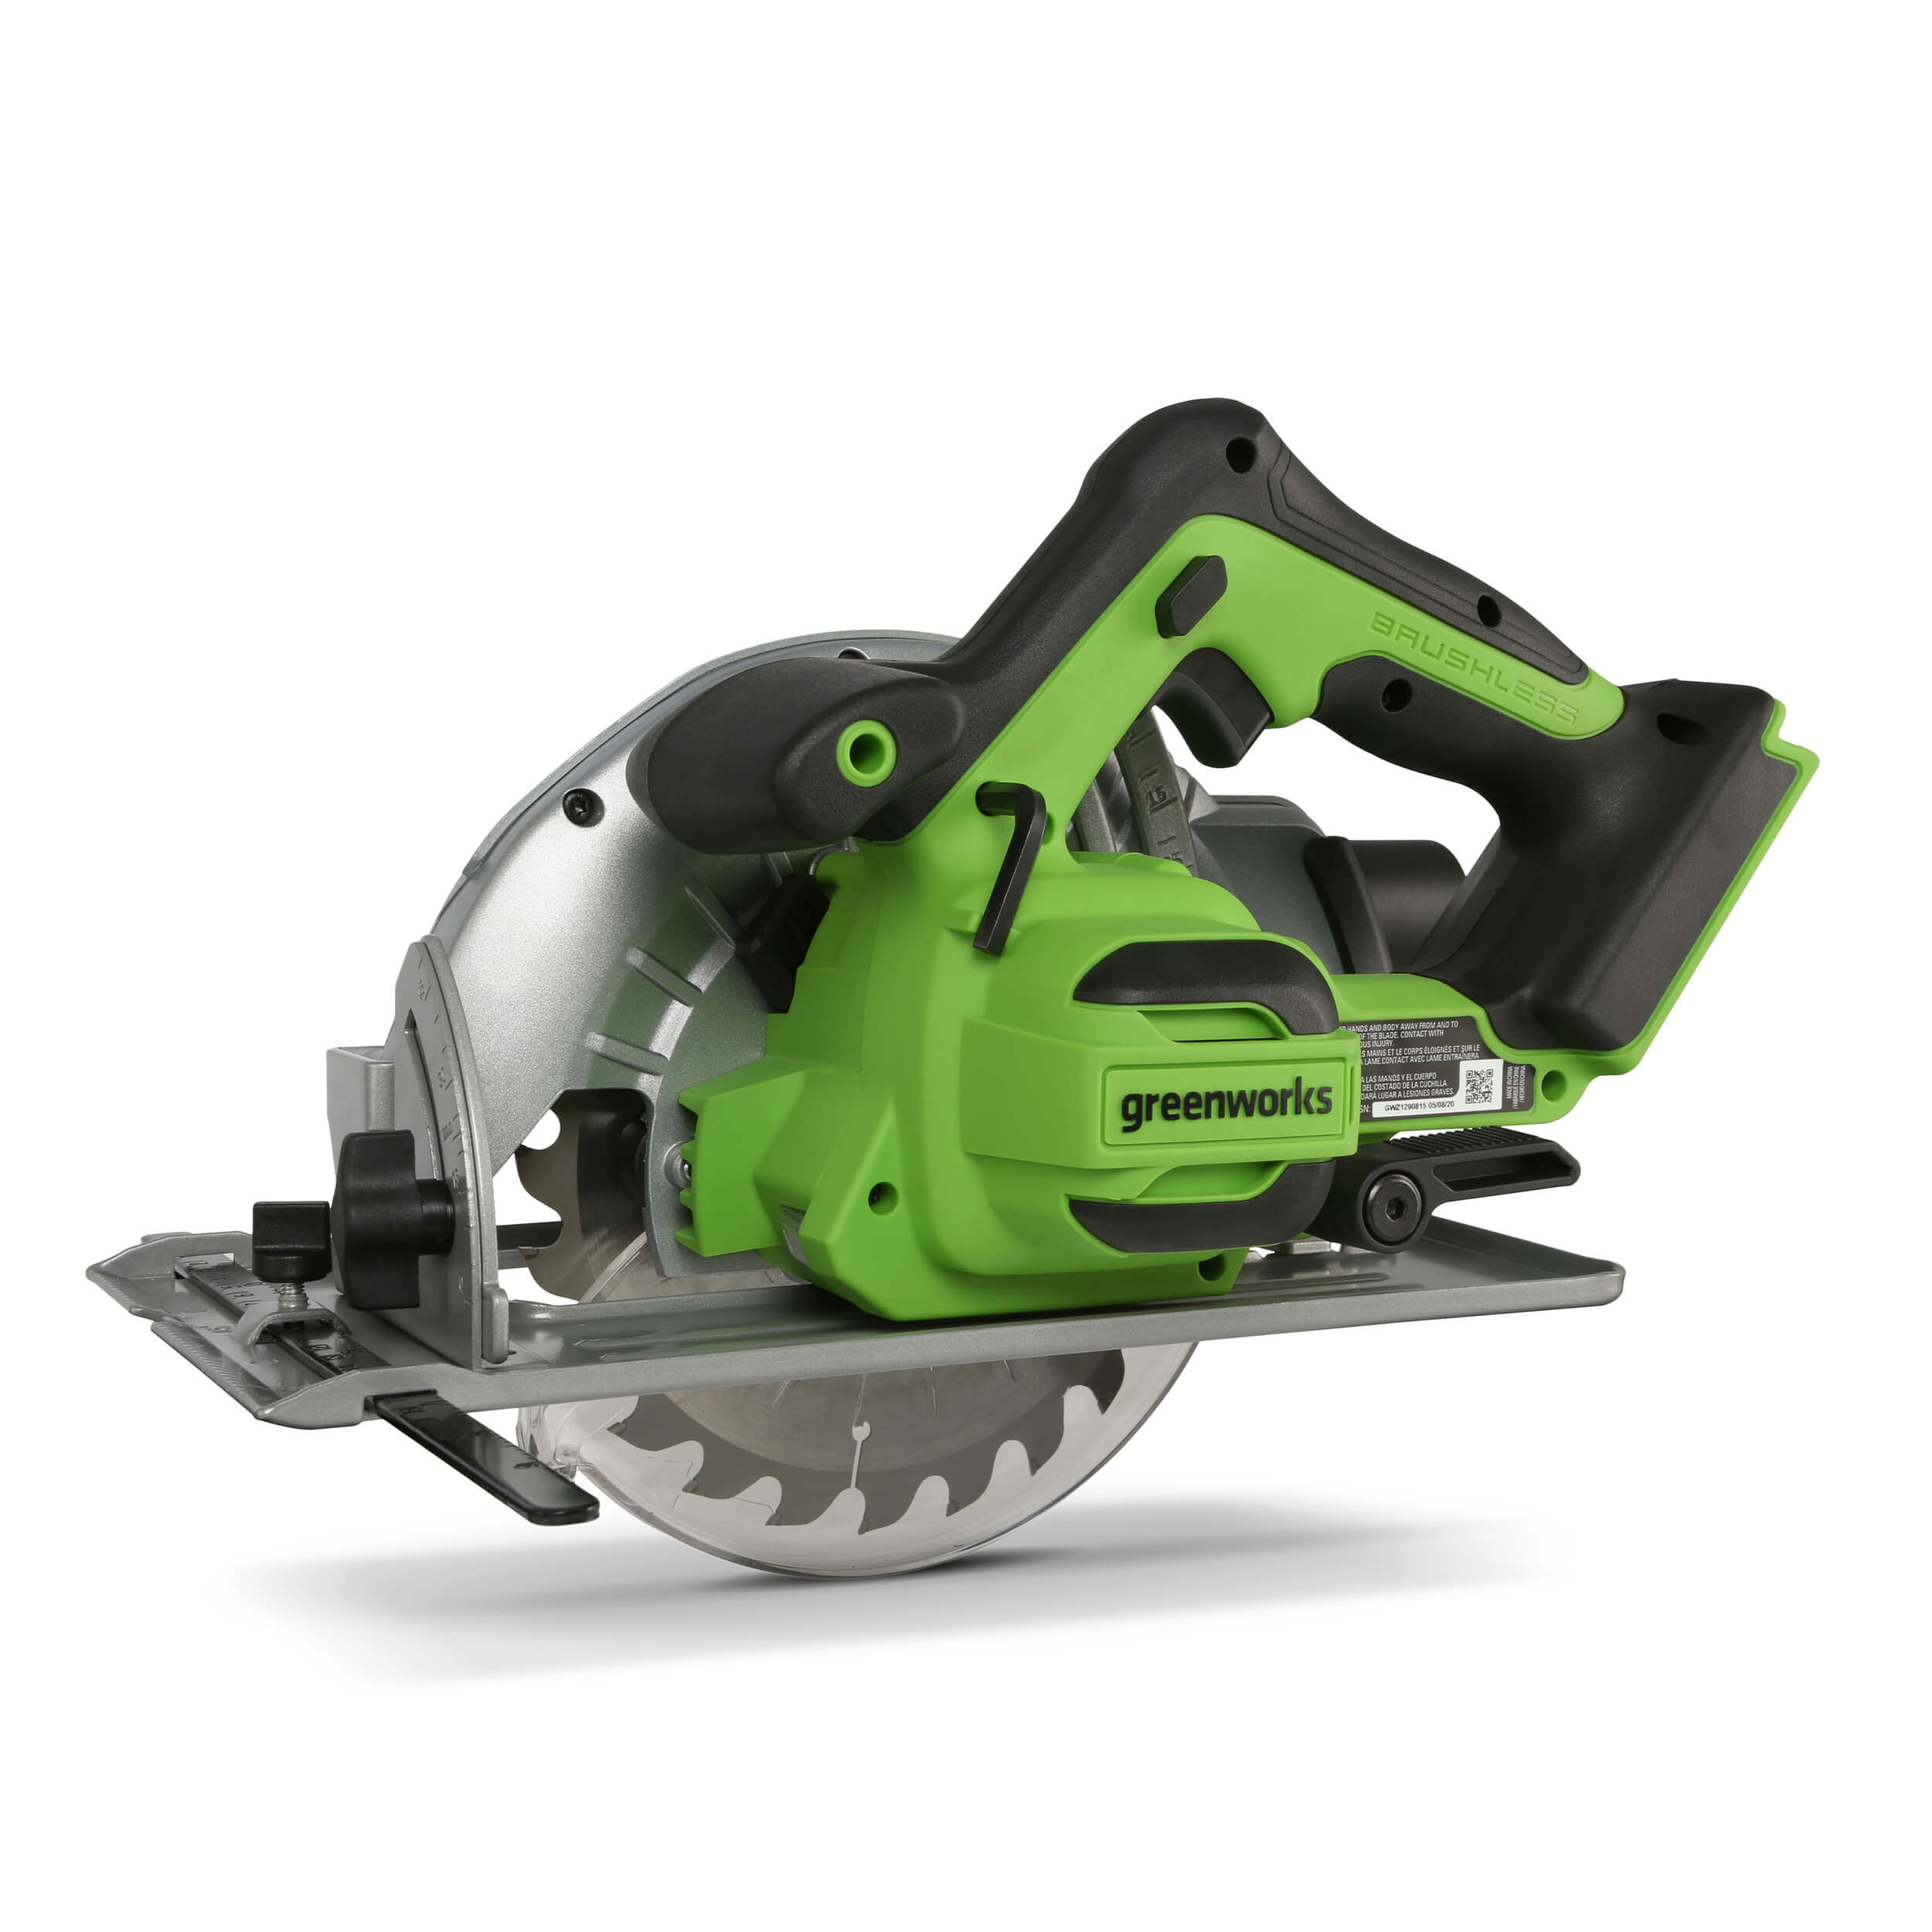 What are the Applications of a Compact Cordless Circular Saw in Diy Projects?